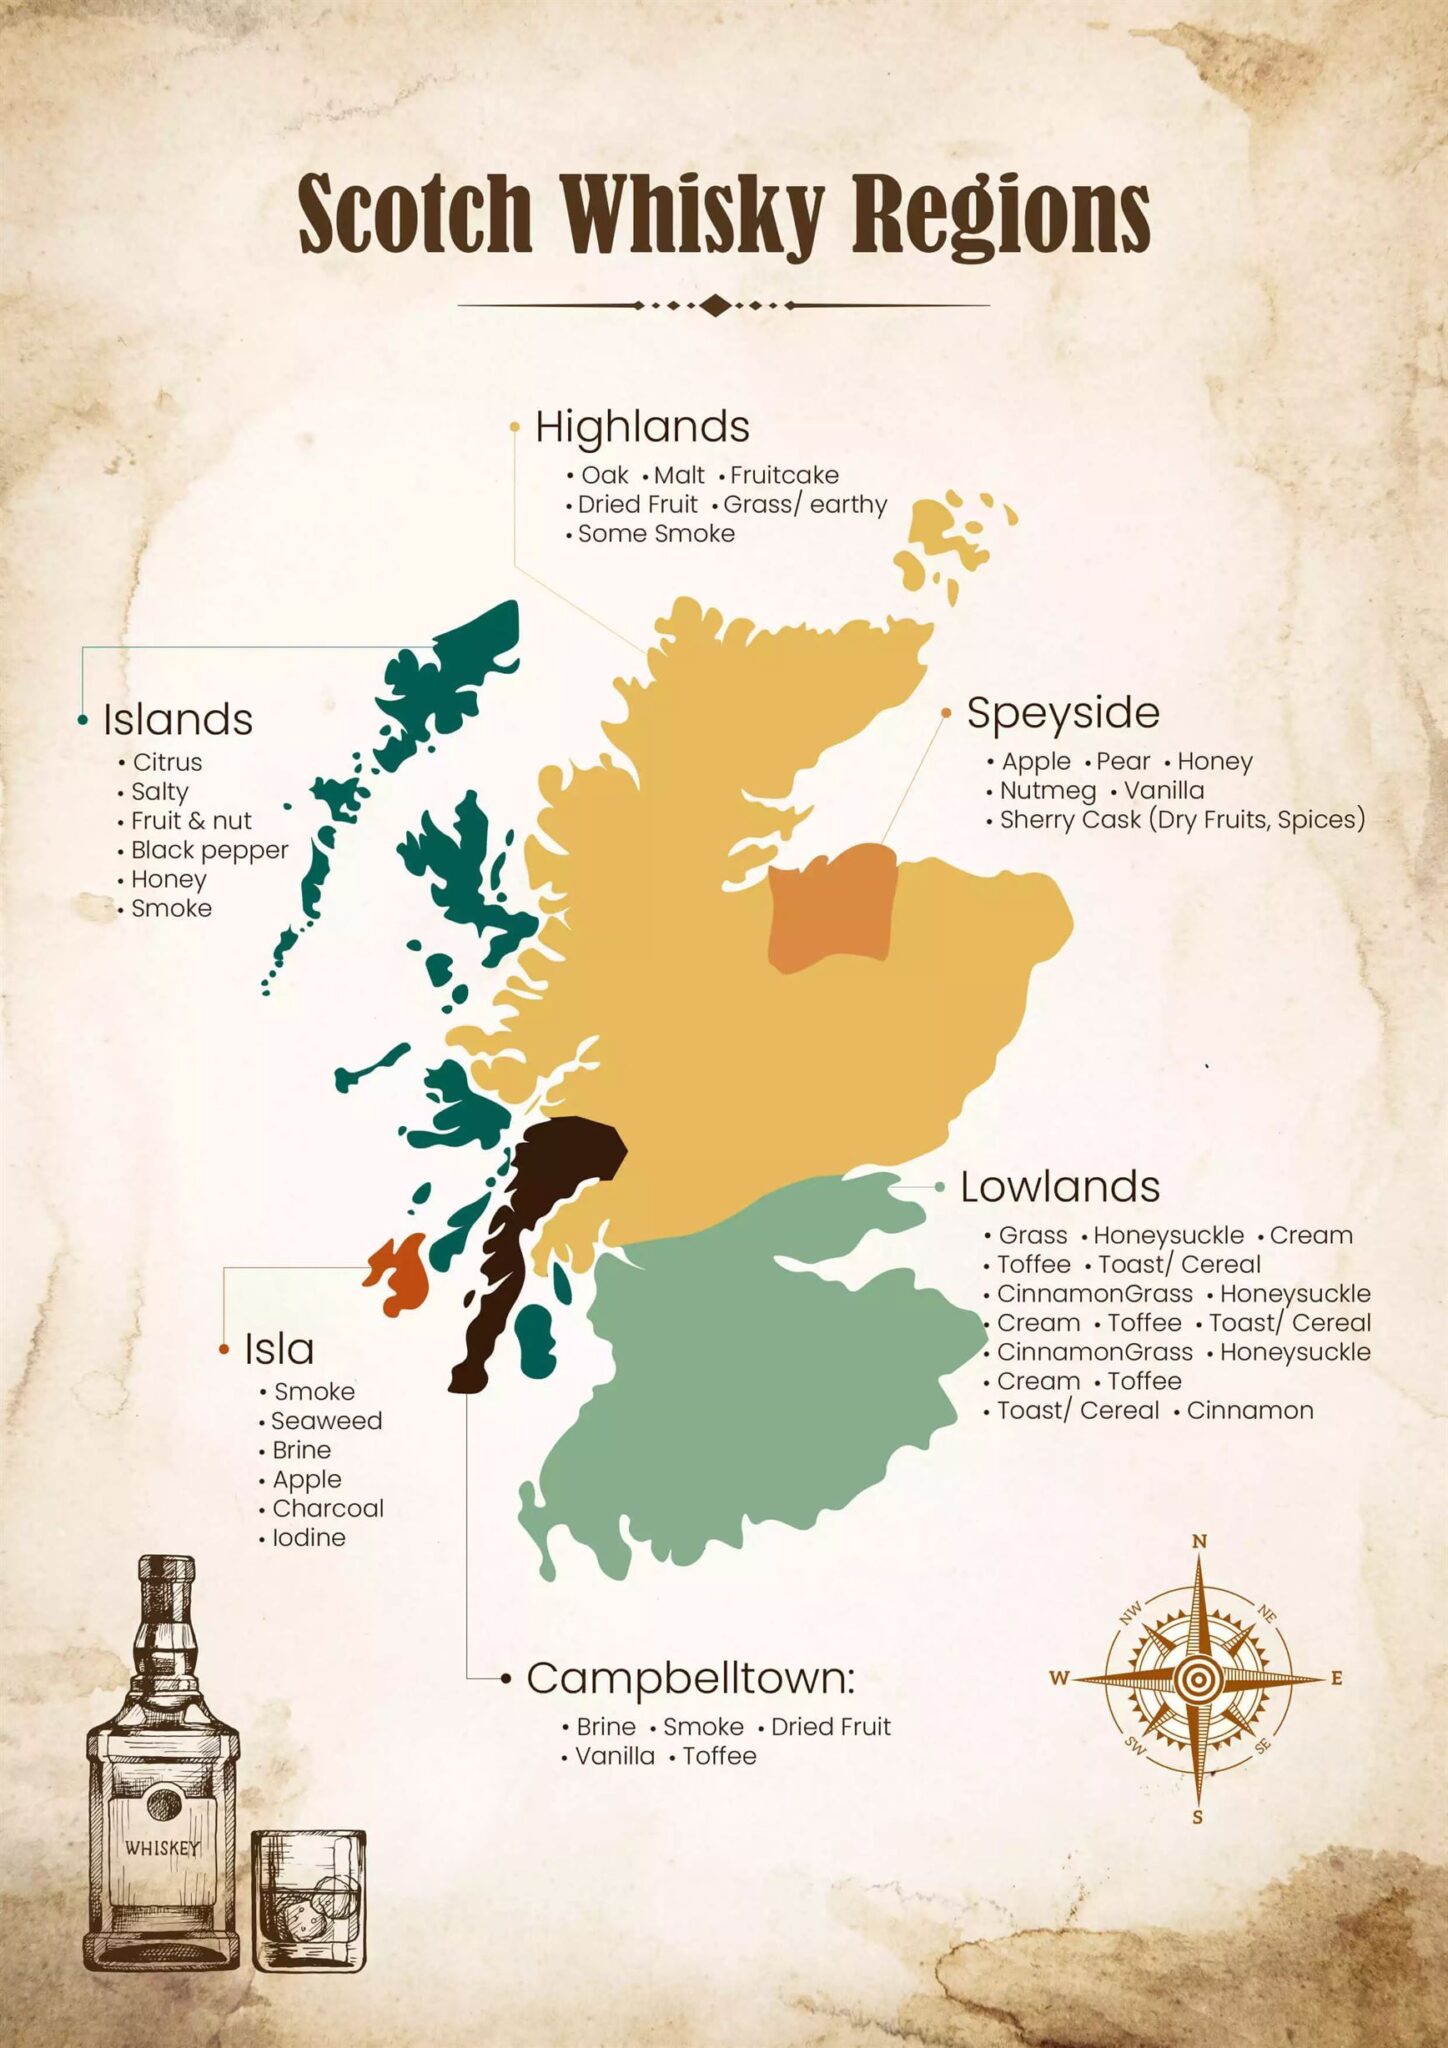 Scotch Whisky Regions Types And Characteristics Of Whisky In Scotland Whiskeymalt 4560